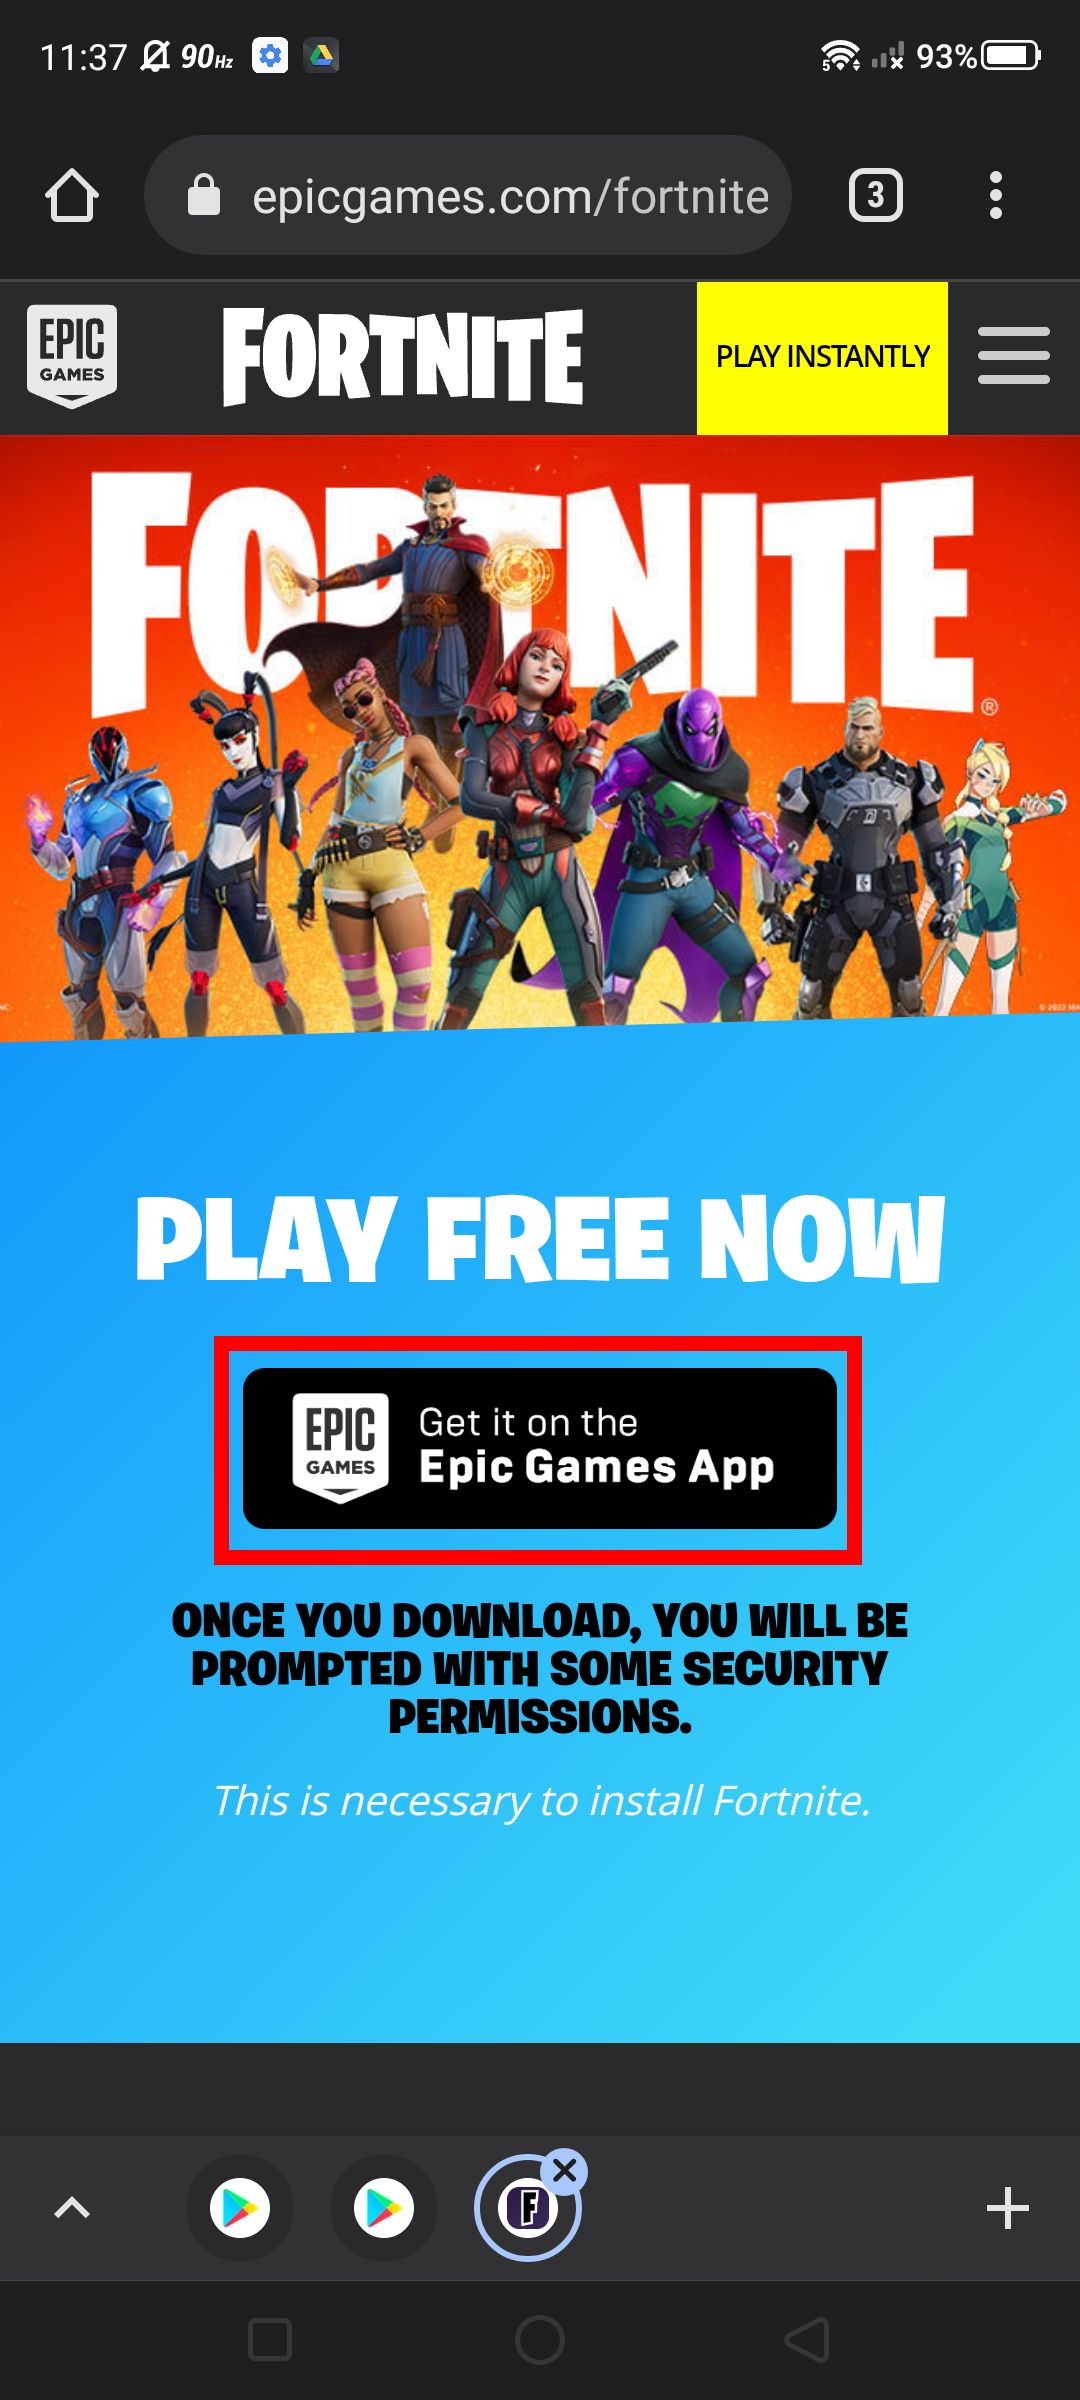 Accessing the Epic Games App on Epic Games website